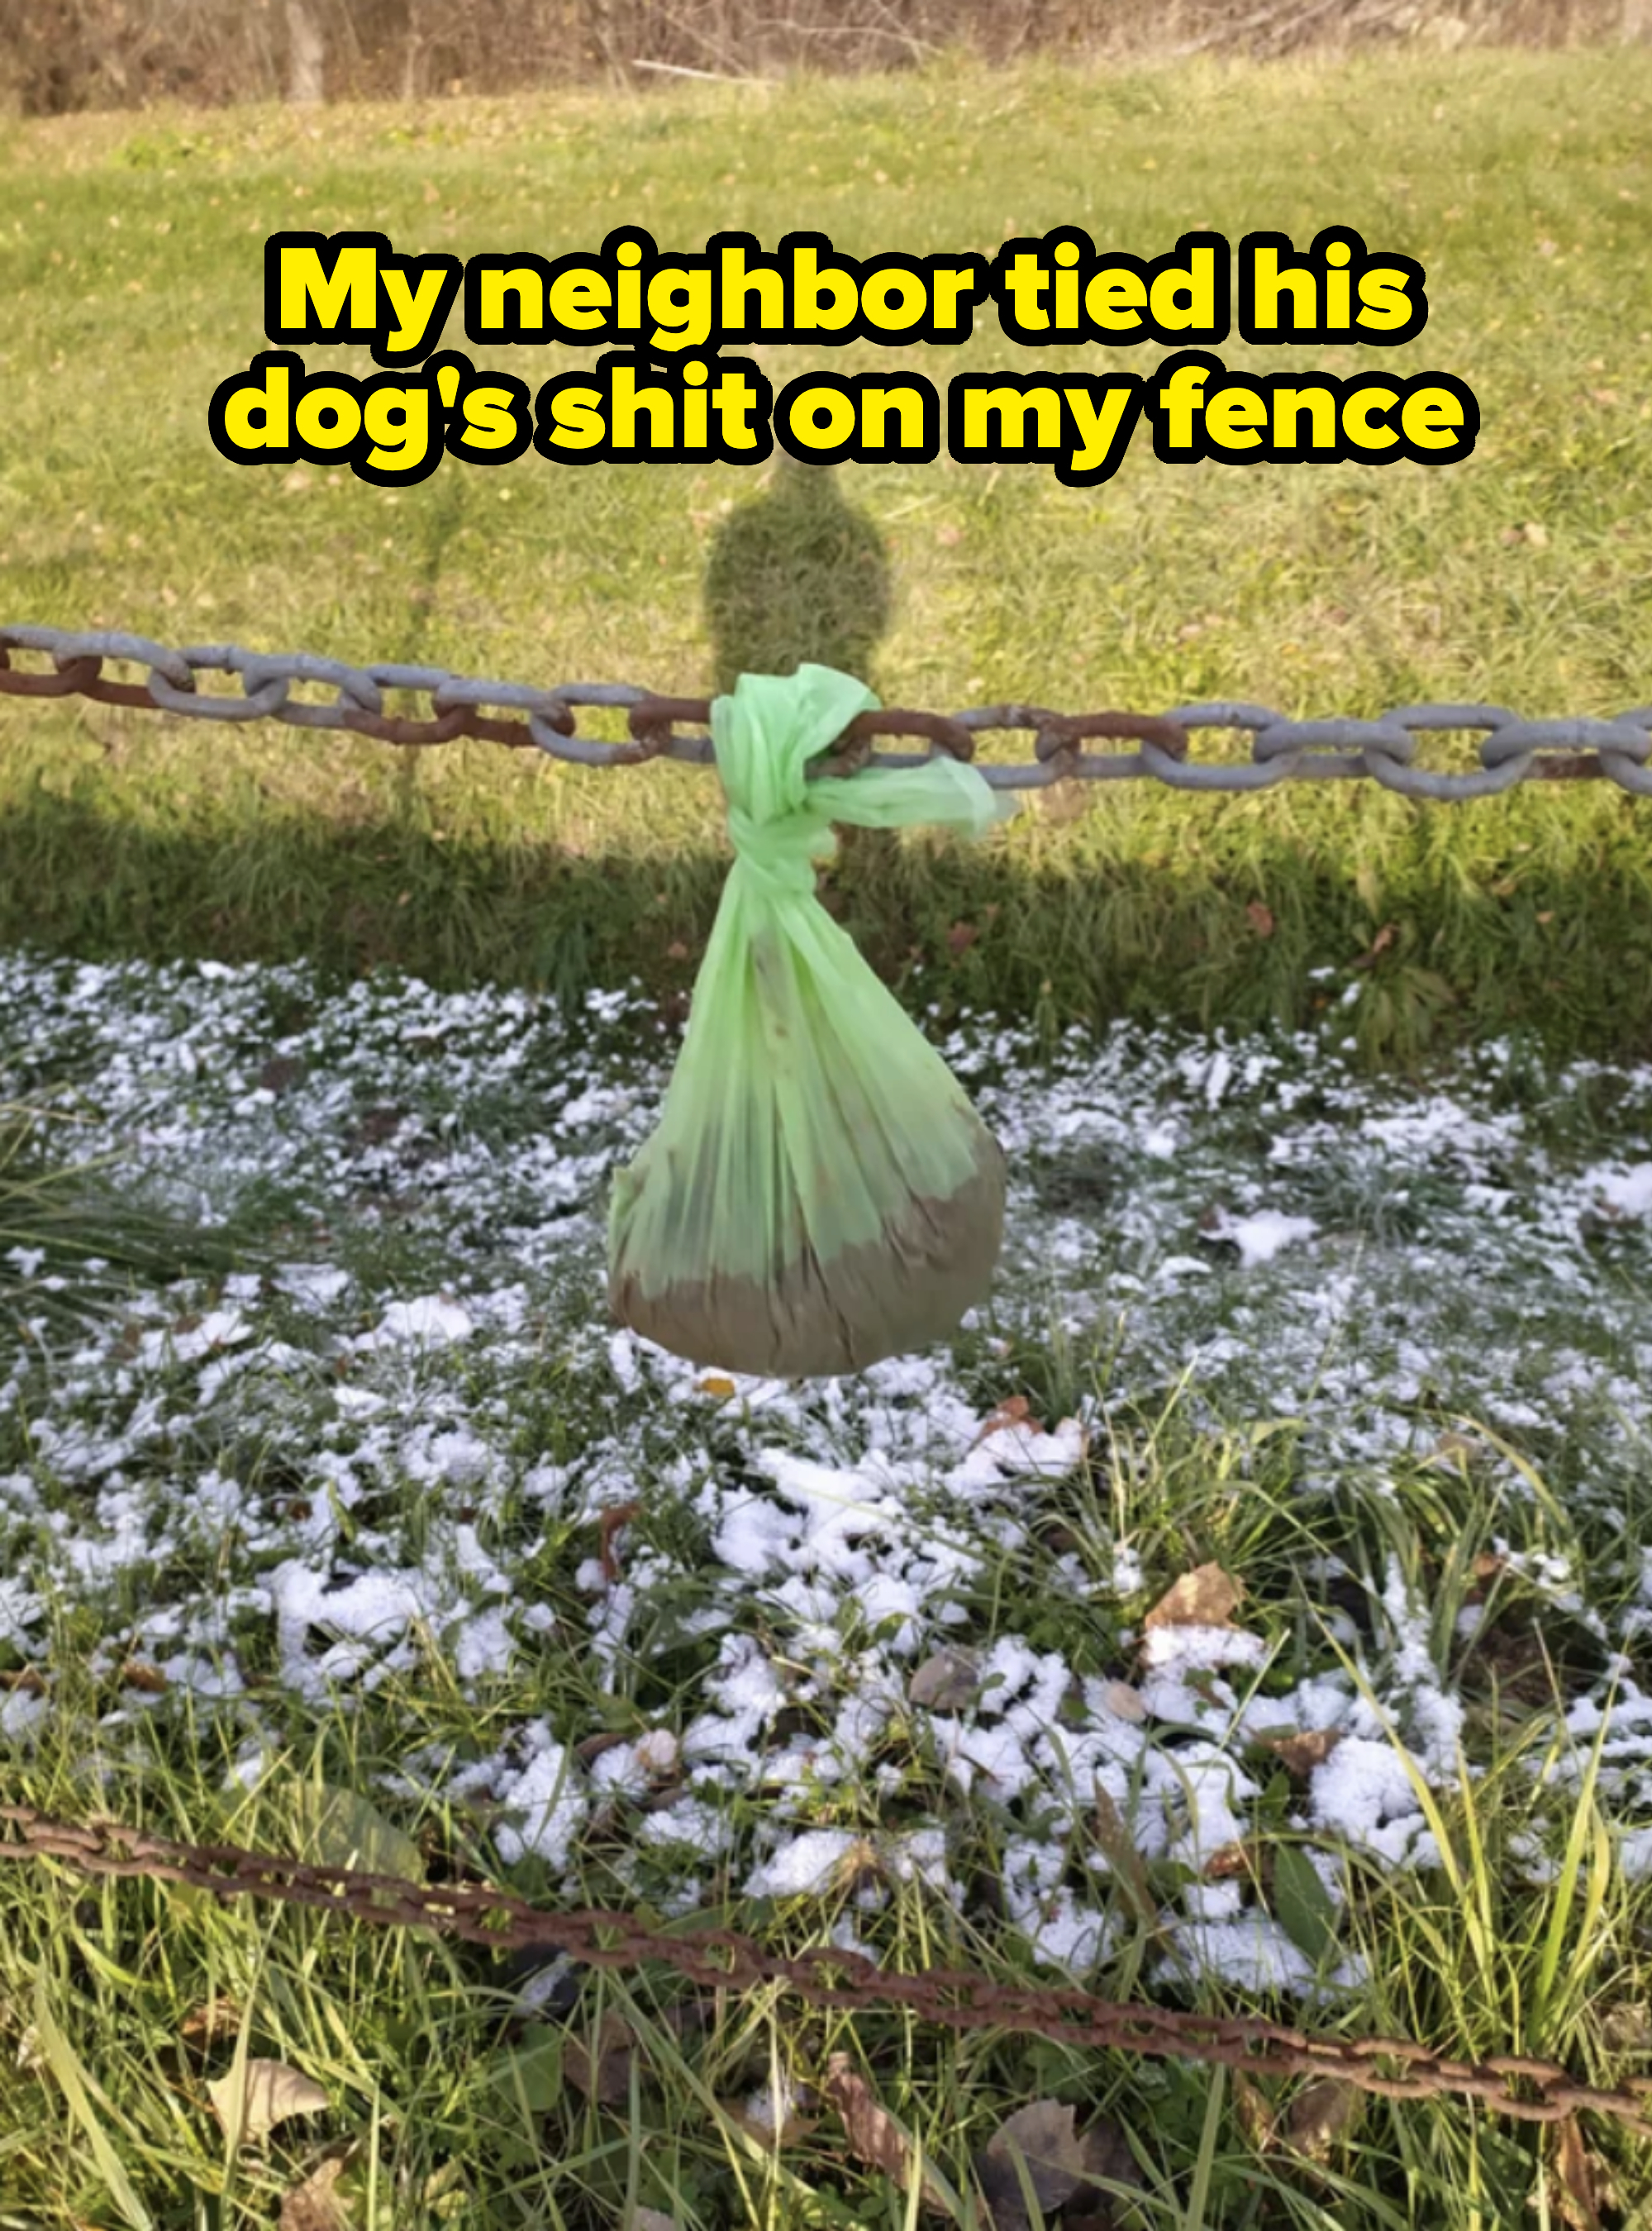 &quot;My neighbor tied his dog&#x27;s shit on my fence&quot;